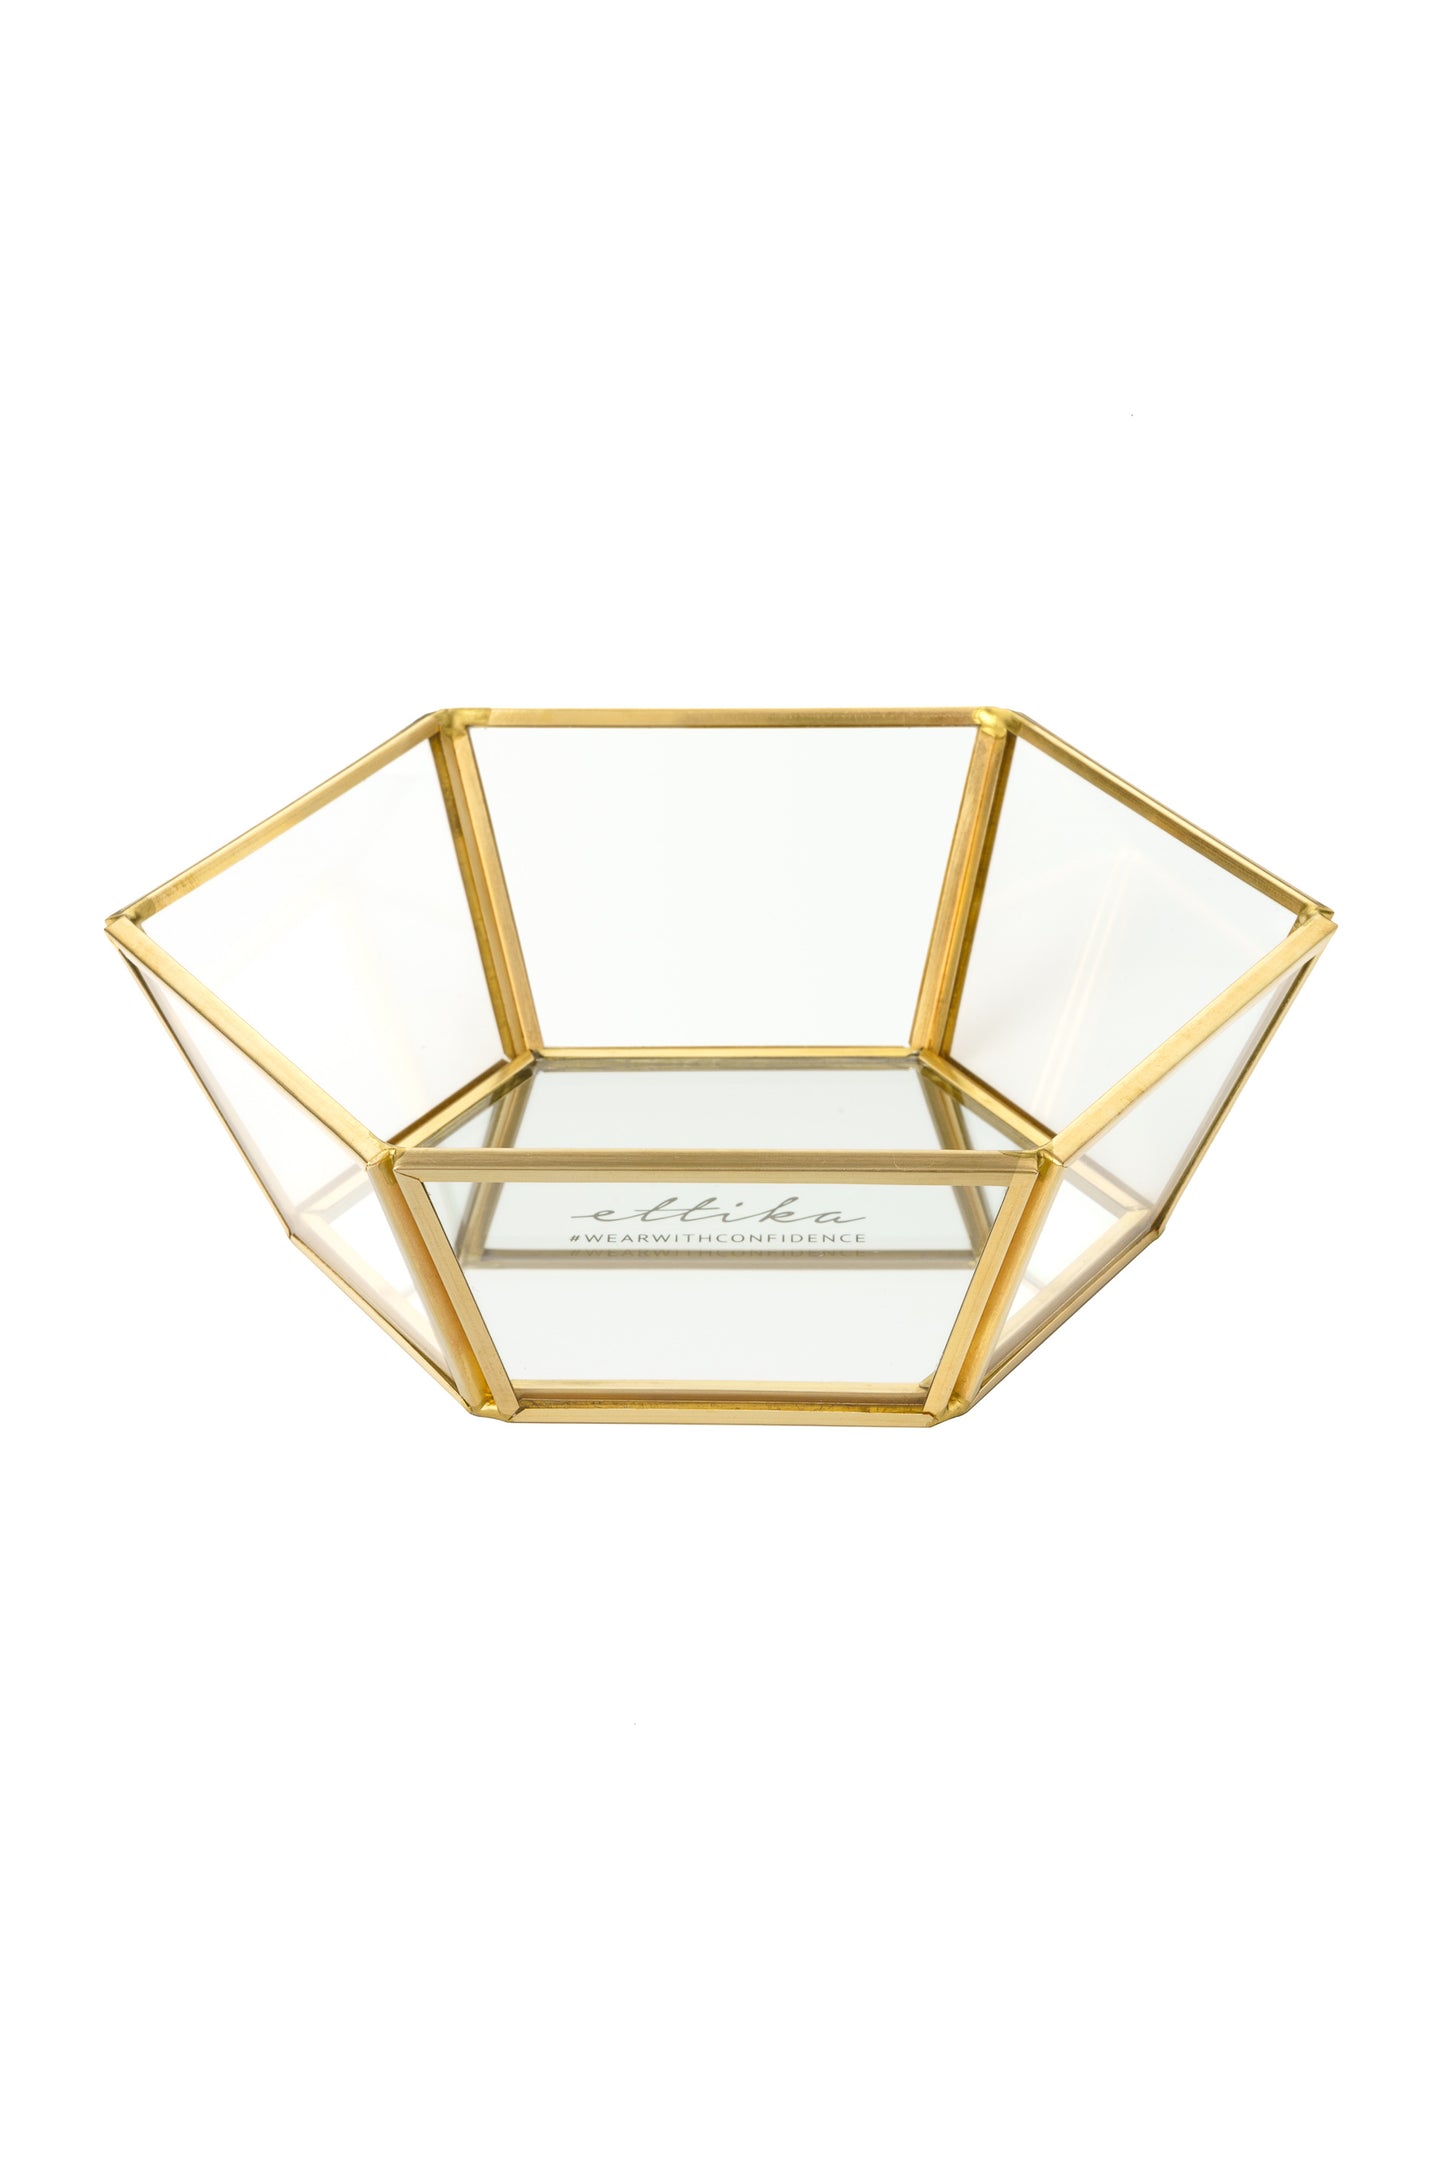 Small High Sided Mirror Bottom Jewelry and Display Tray on white background  